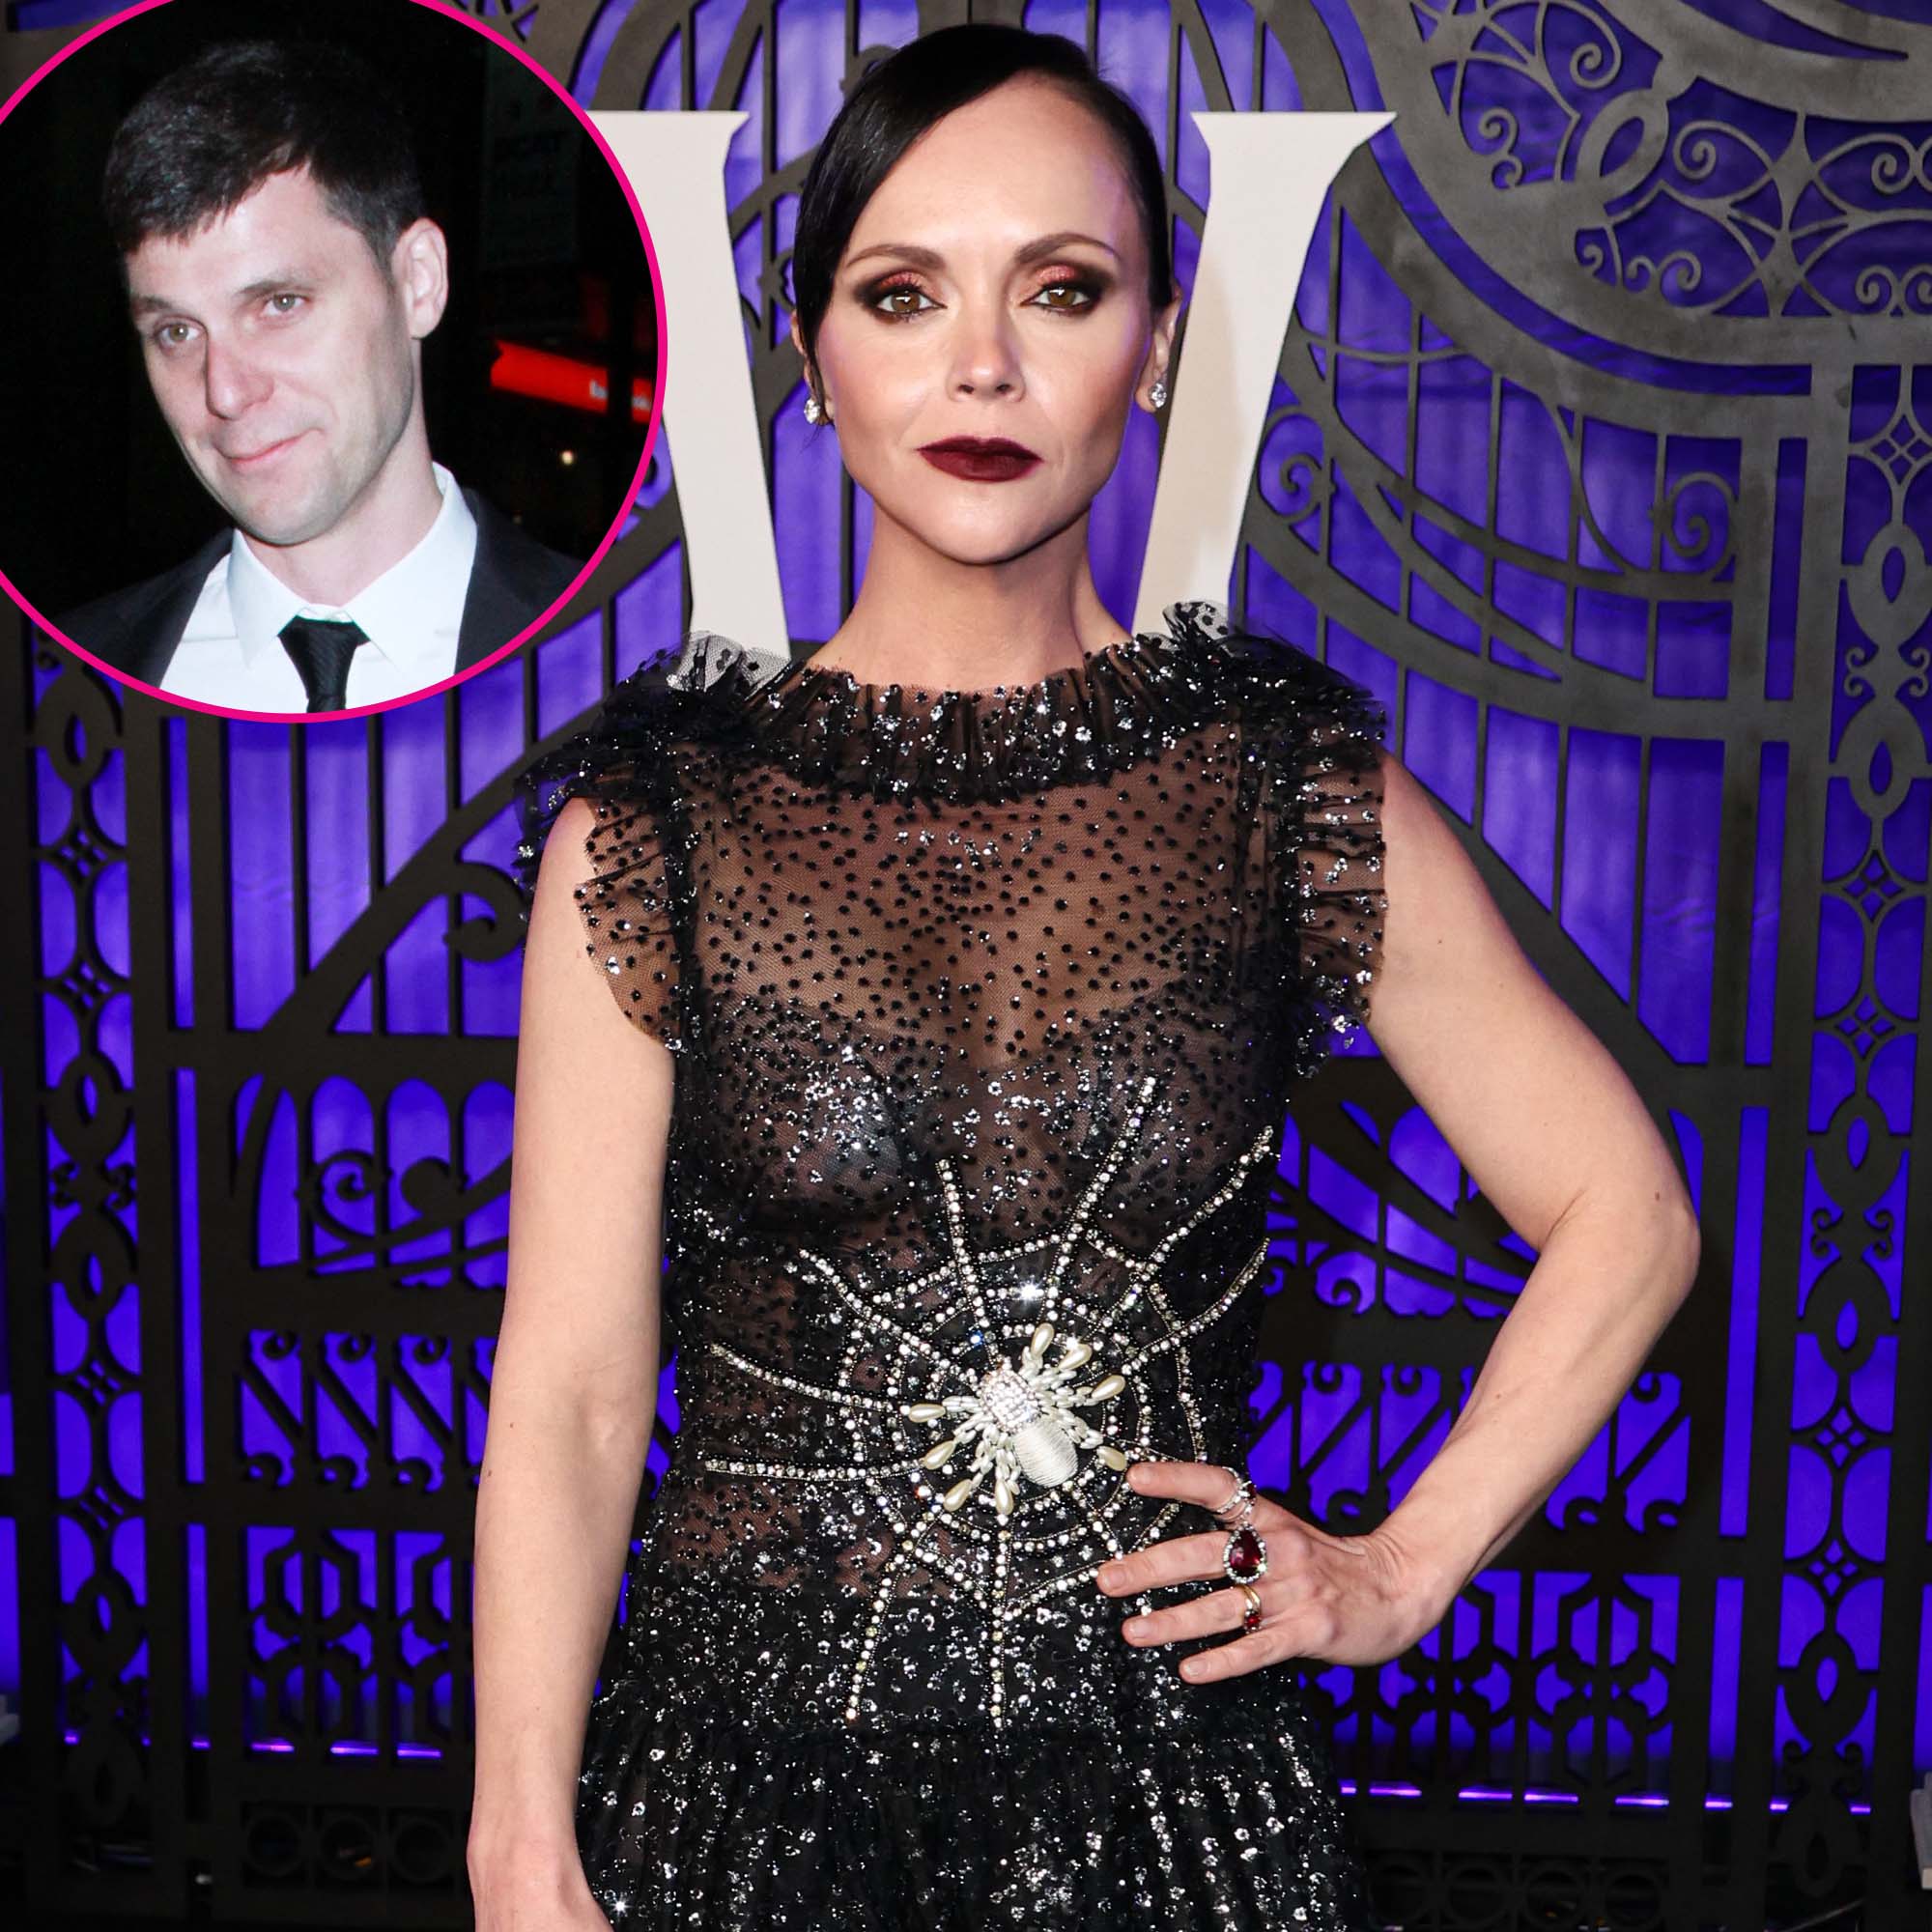 Christina Ricci sold personal handbag collection to pay for divorce